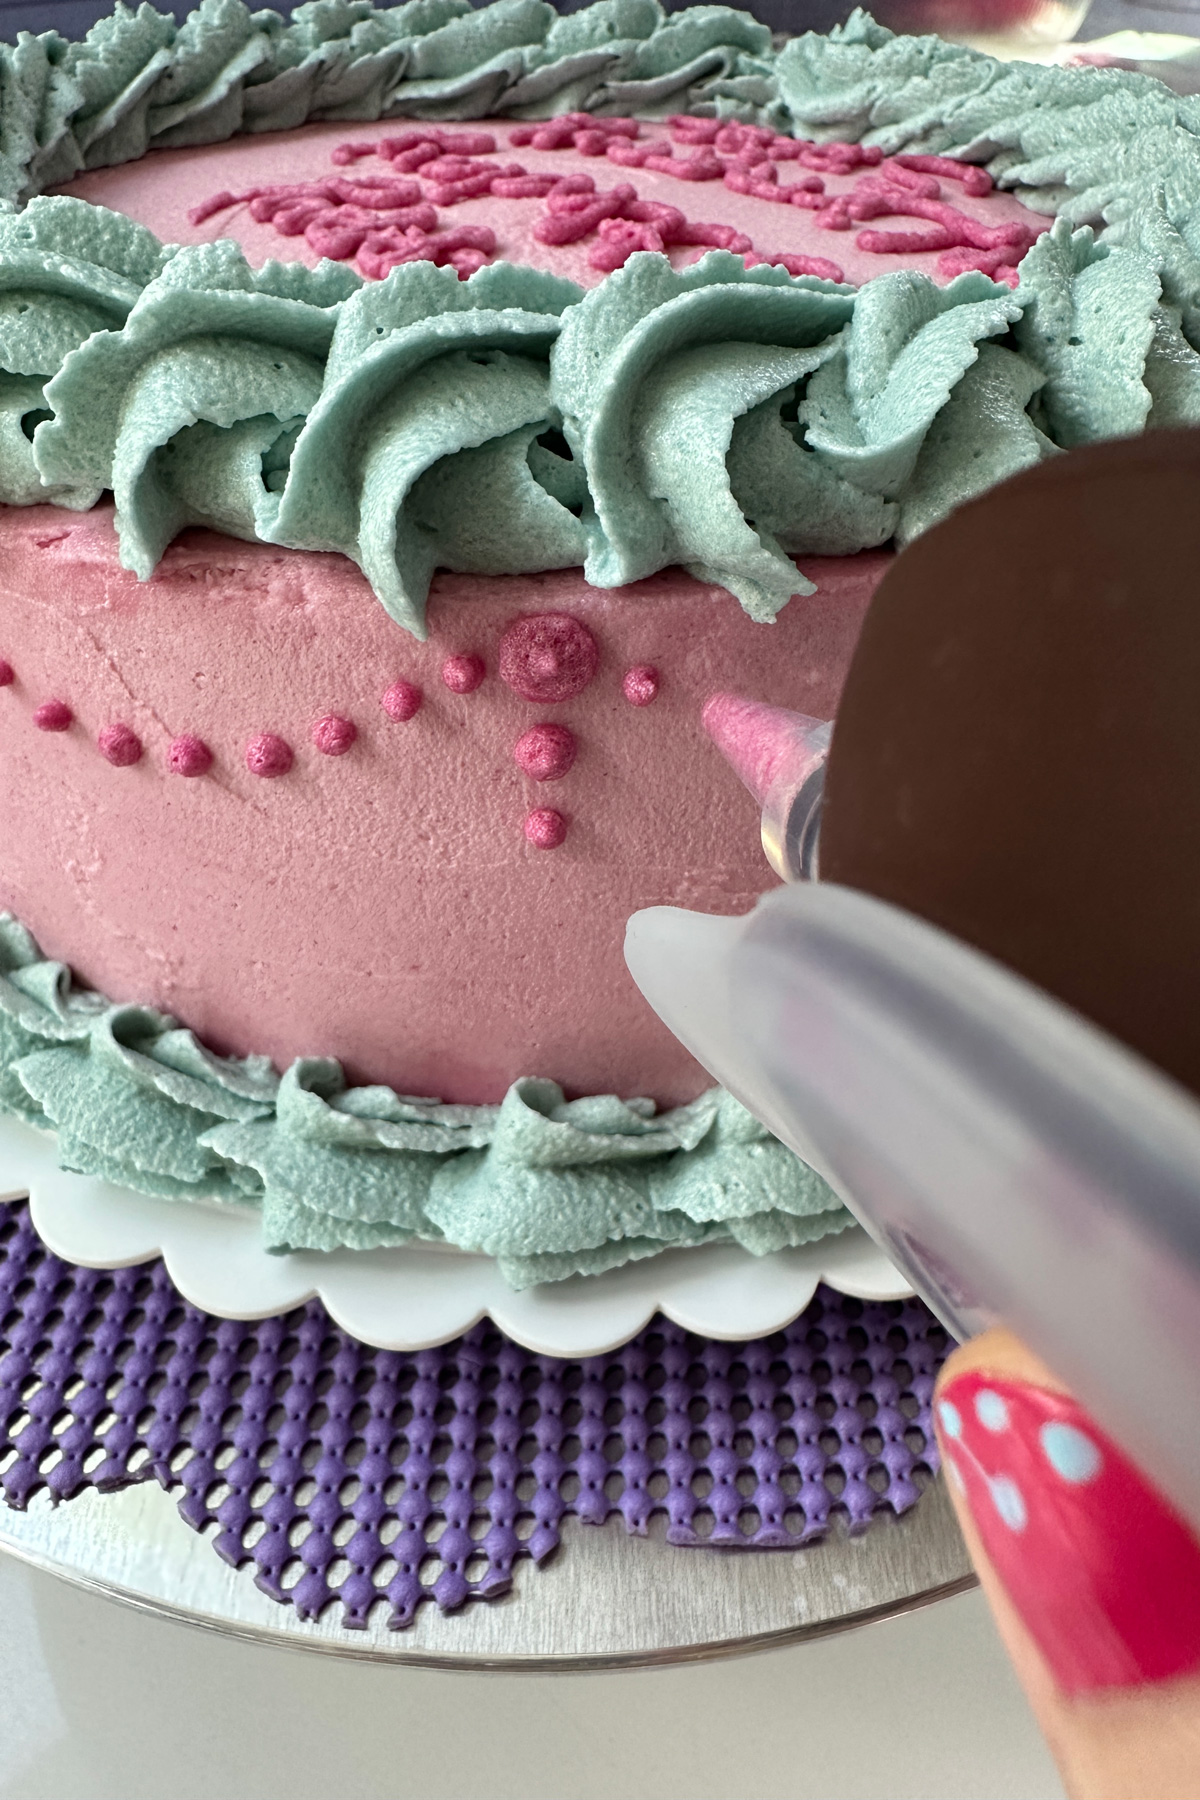 adding a vintage Victorian pattern to the sides of the pink nutella cake